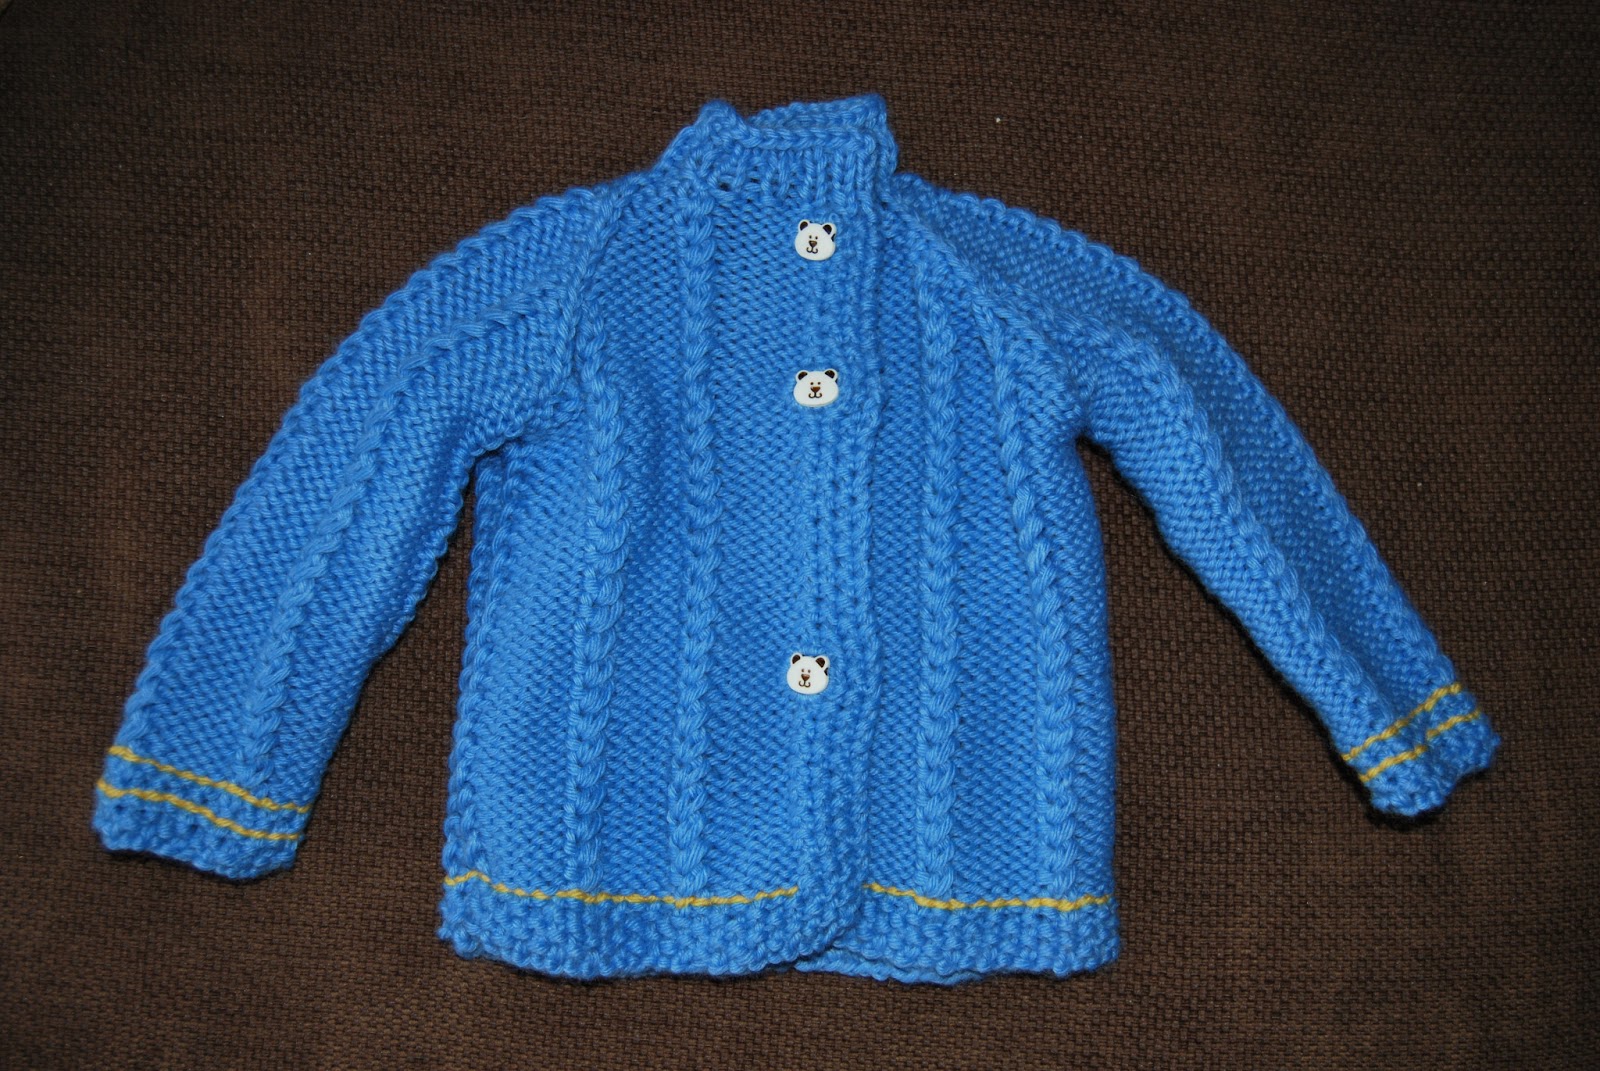 Mo's creations: Children's clothing